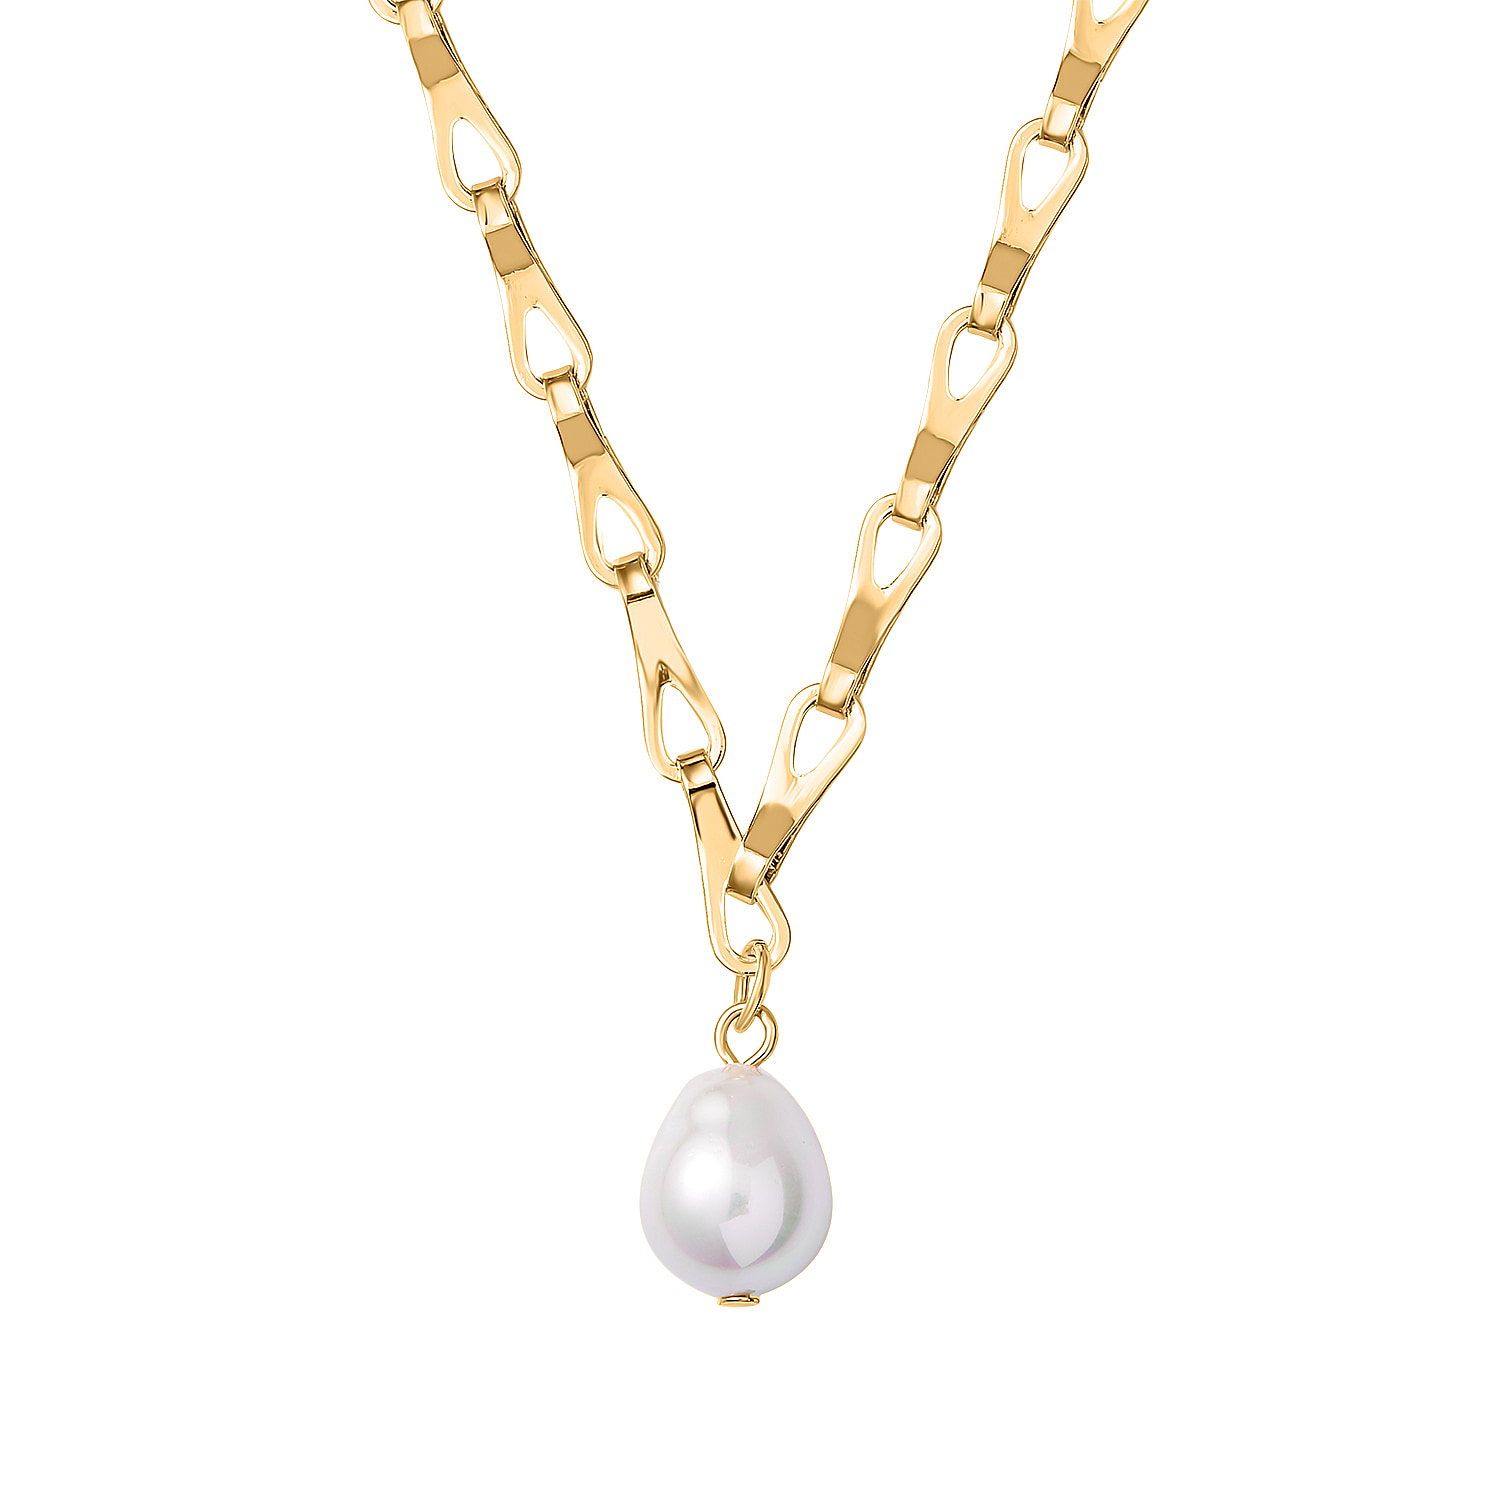 Designer Inspired - White Baroque Shape Shell Pearl Necklace (Size - 20)